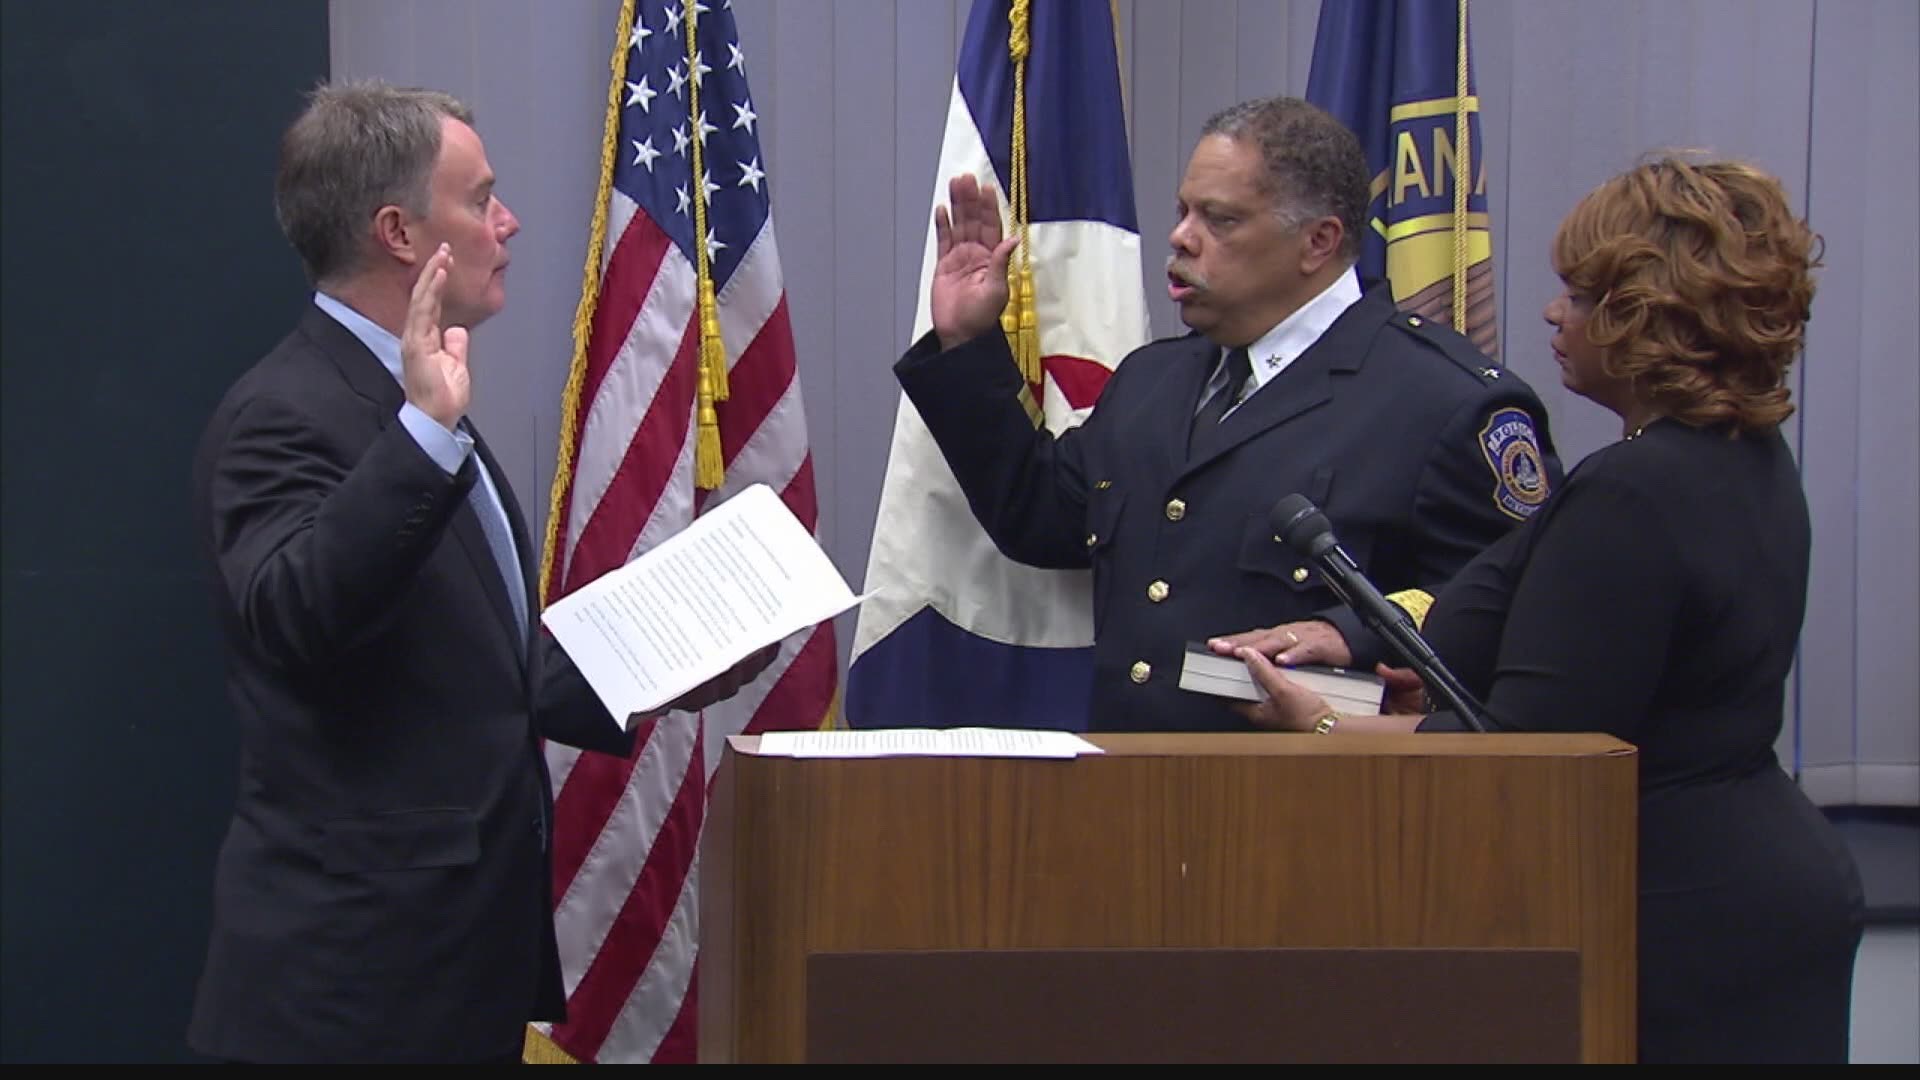 IMPD Chief Randal Taylor sat down with 13News to talk about his first six months in the role.